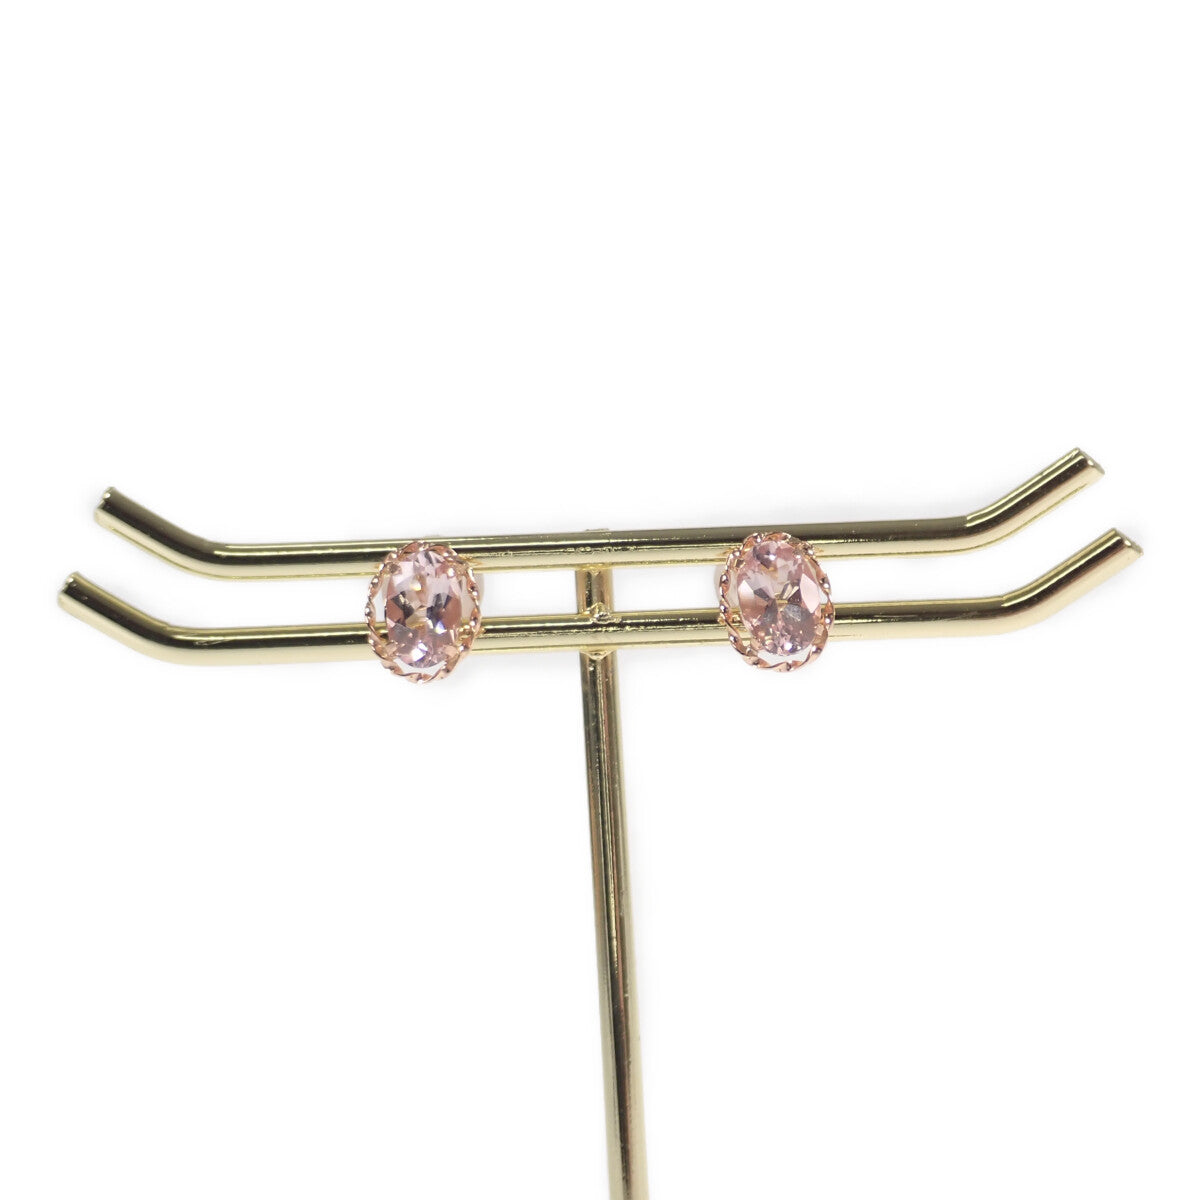 [LuxUness]  Women's 0.35ct Morganite Design Earrings in K18 Pink Gold, Gold, Never Used, Pre-owned in Brand new